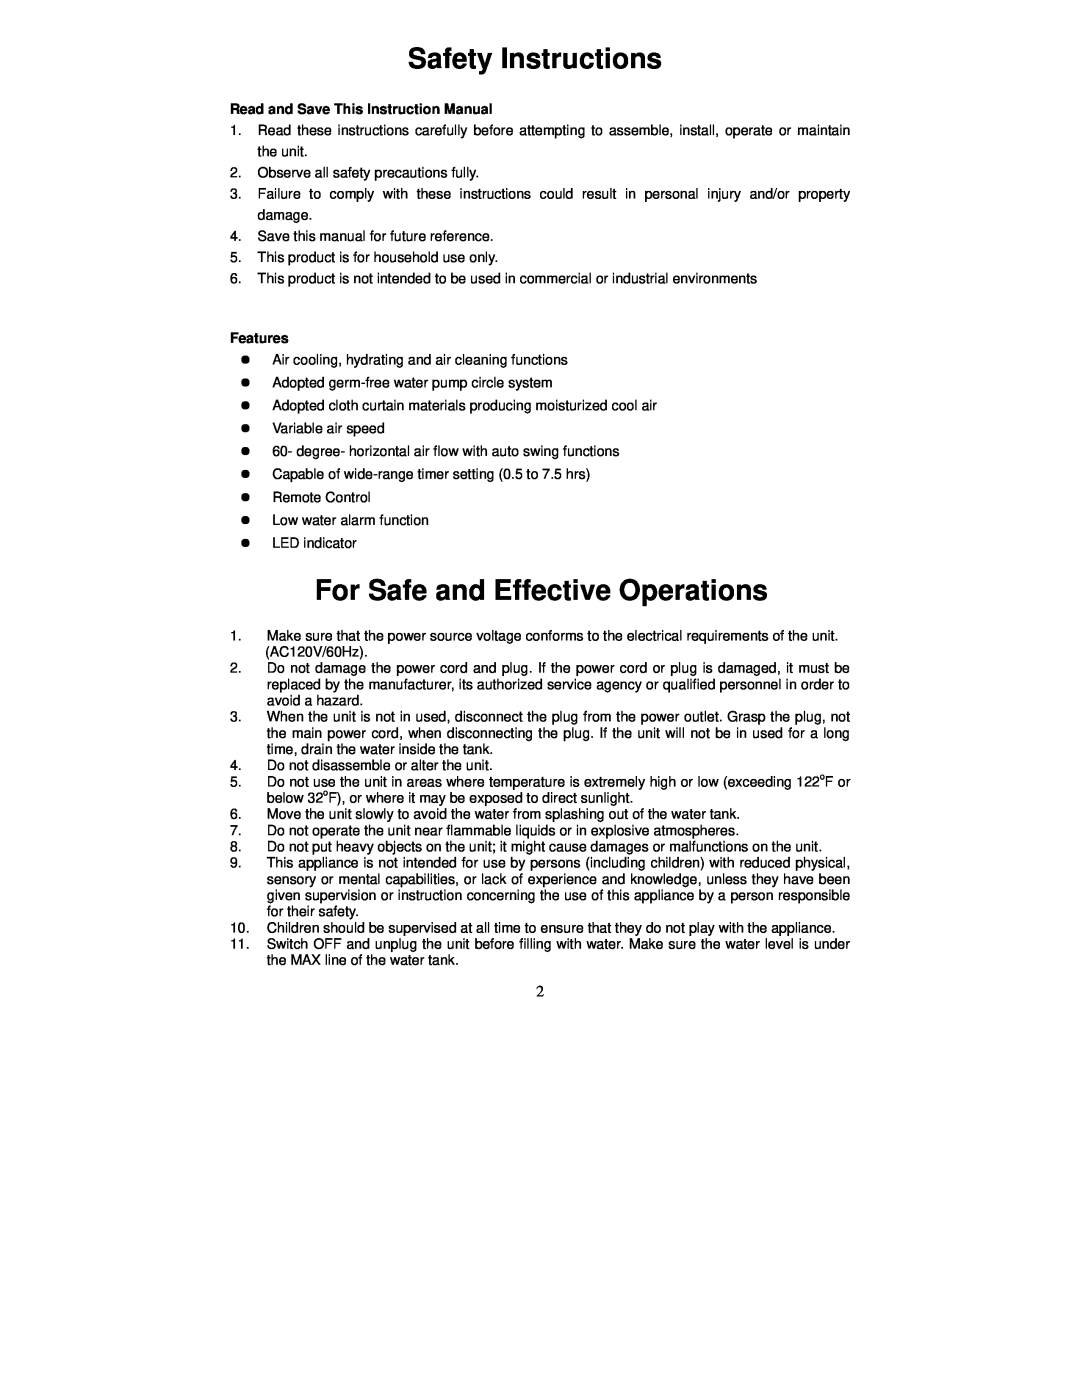 Fujitronic FH-777 instruction manual Safety Instructions, For Safe and Effective Operations, Features 